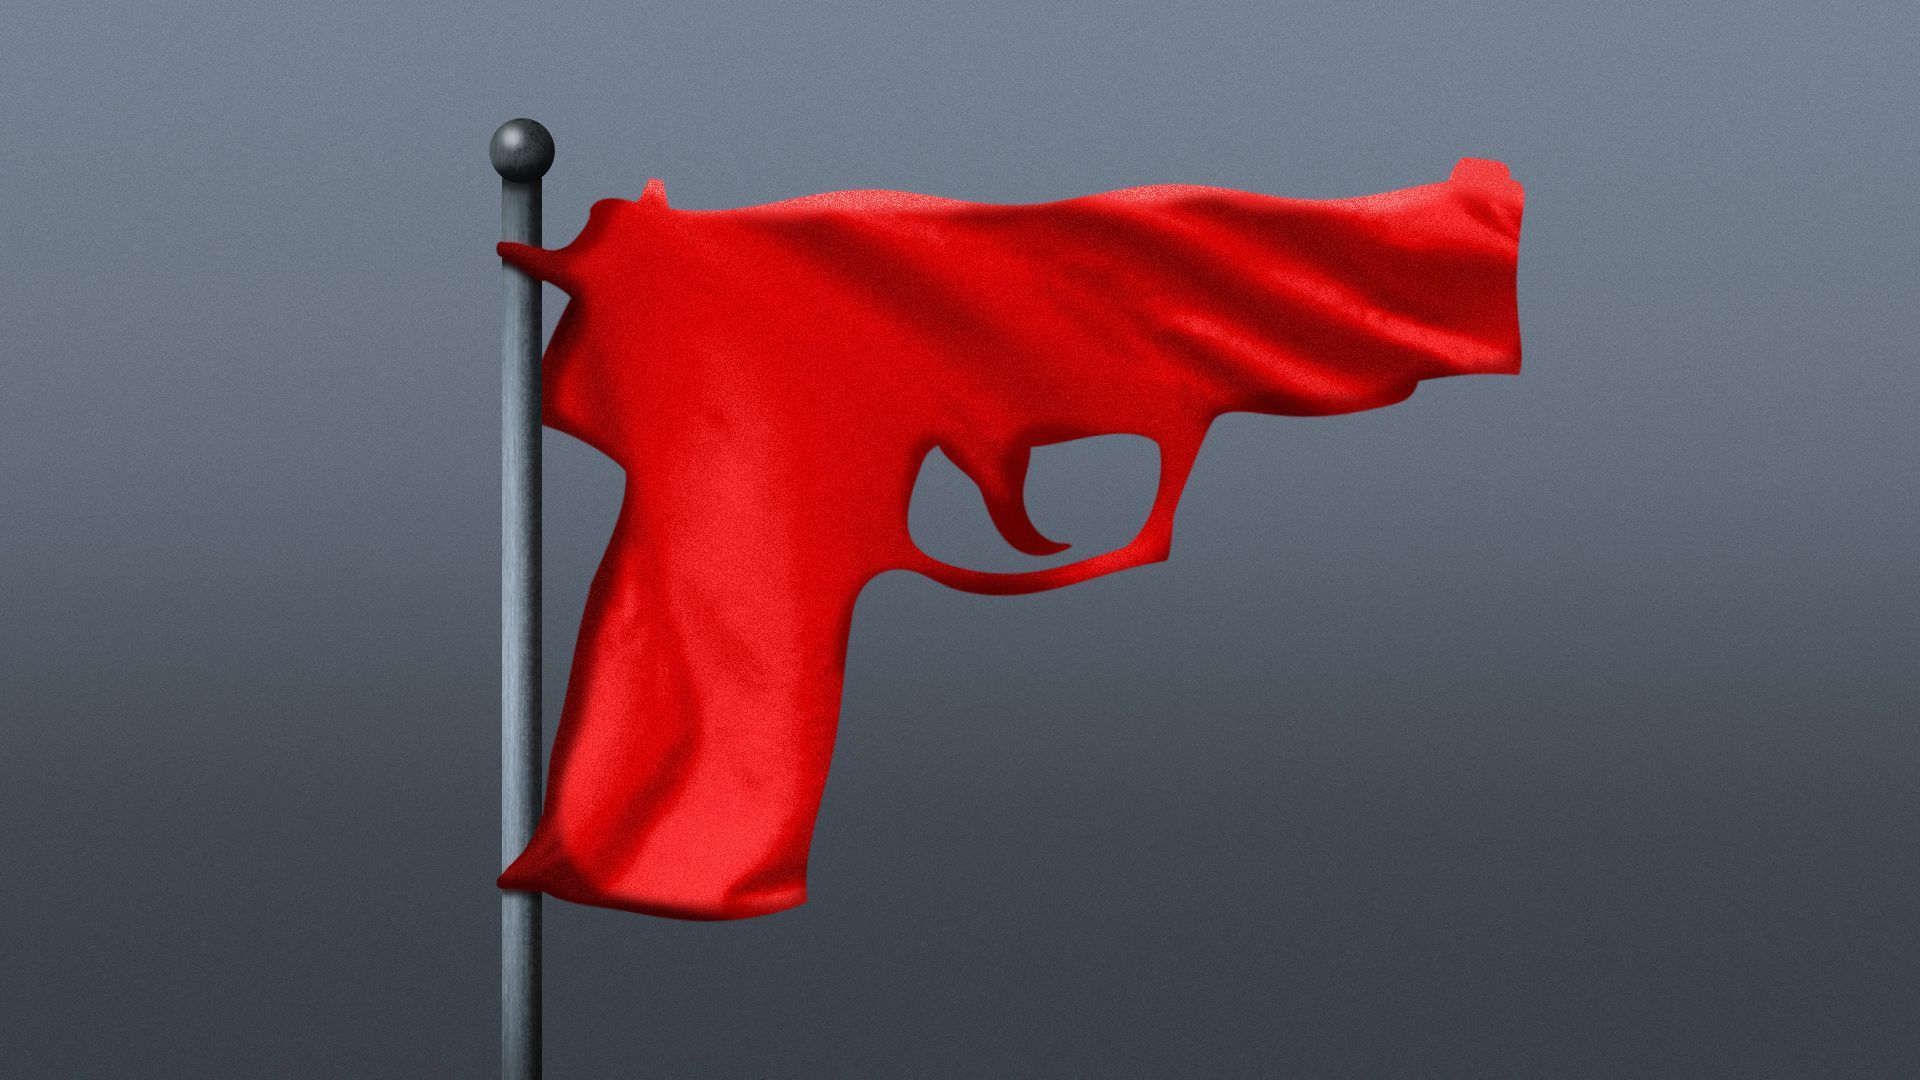 Illustration of a red flag in the shape of a handgun